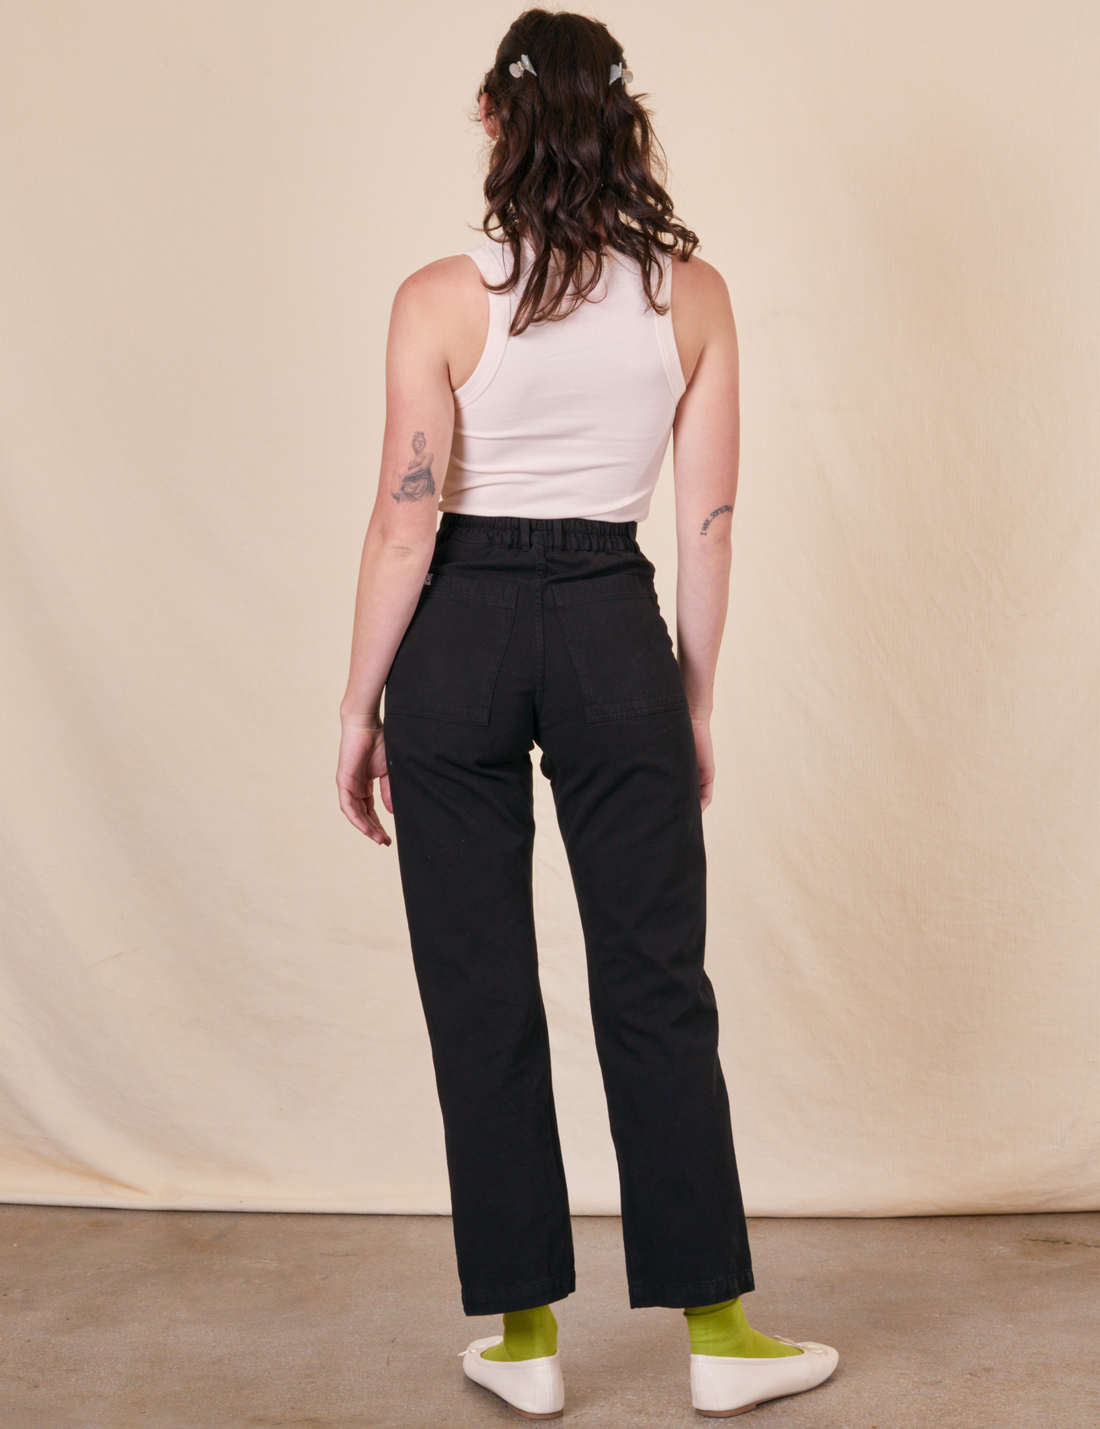  Work Pants in Basic Black back view on Alex